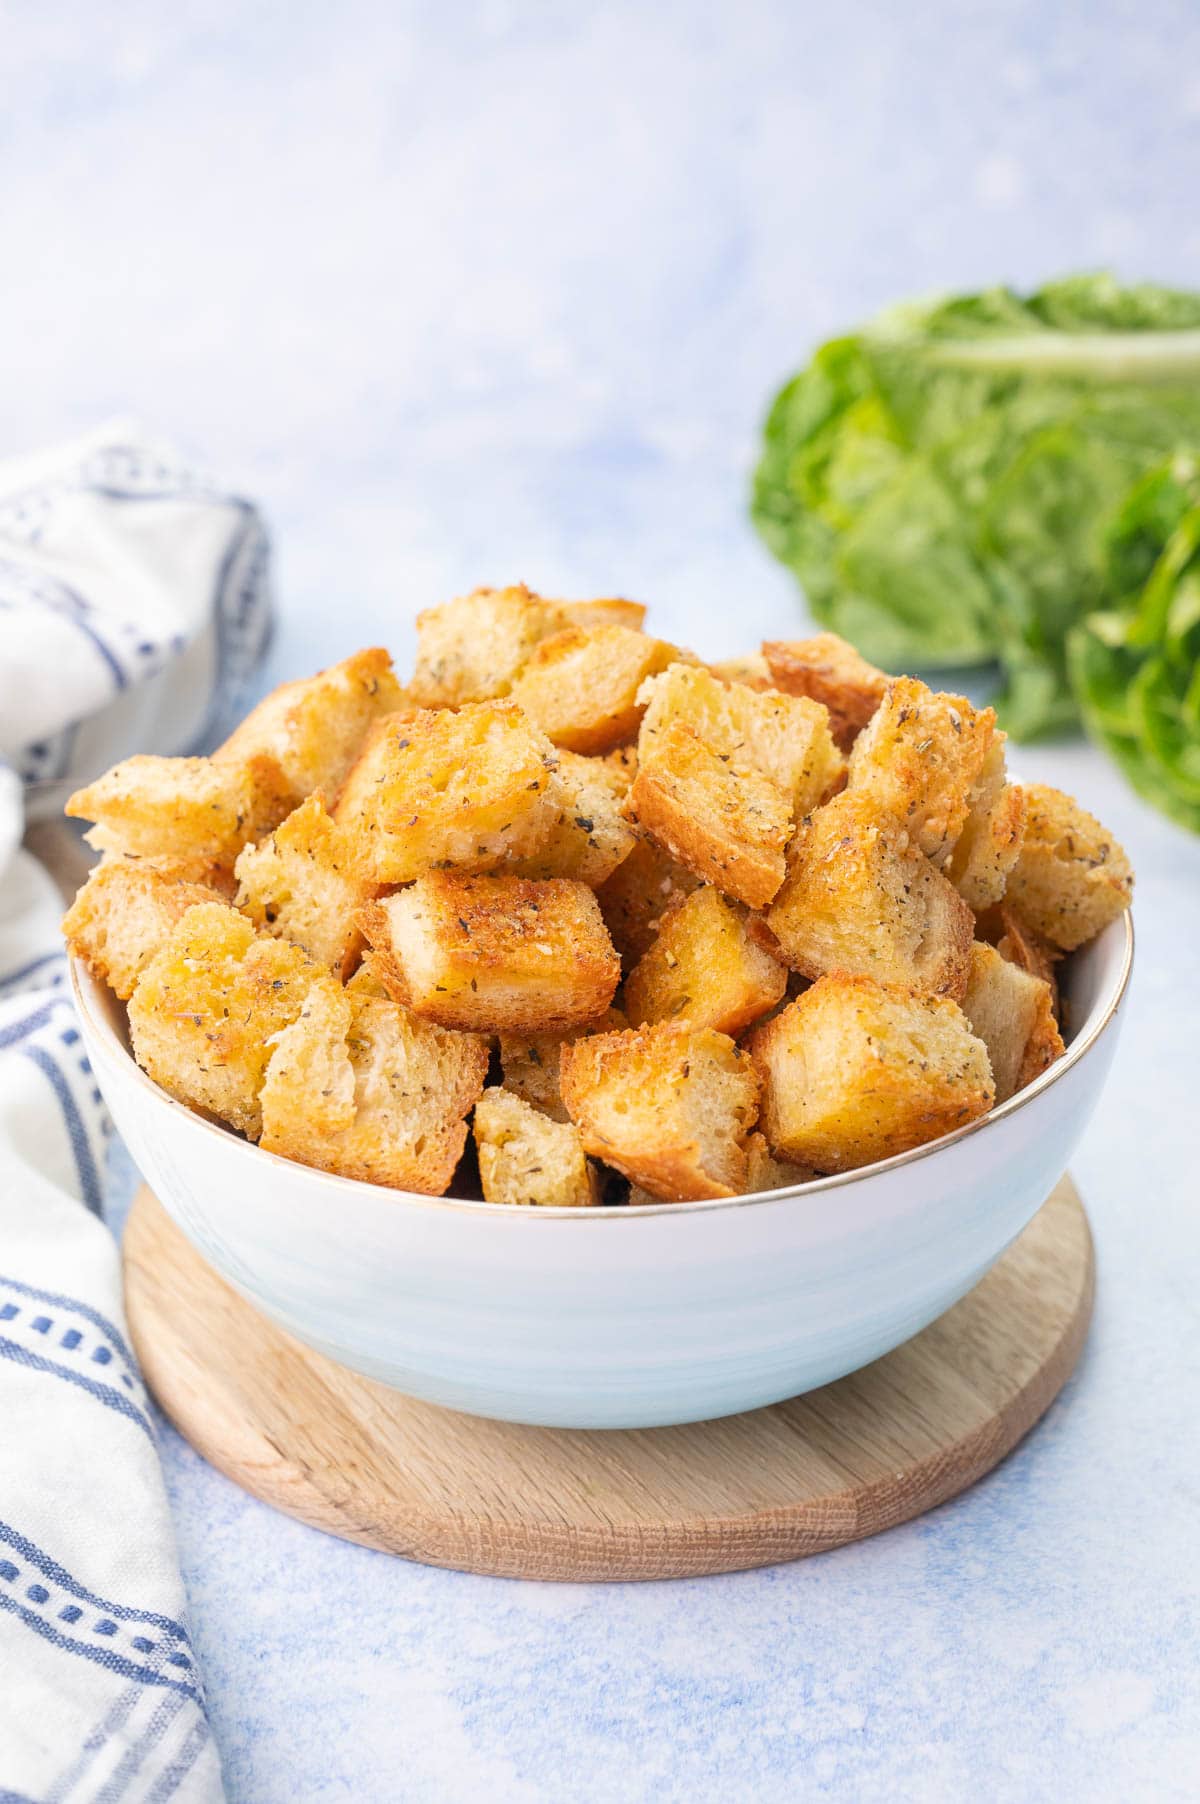 Homemade croutons in a blue bowl on a wooden board.